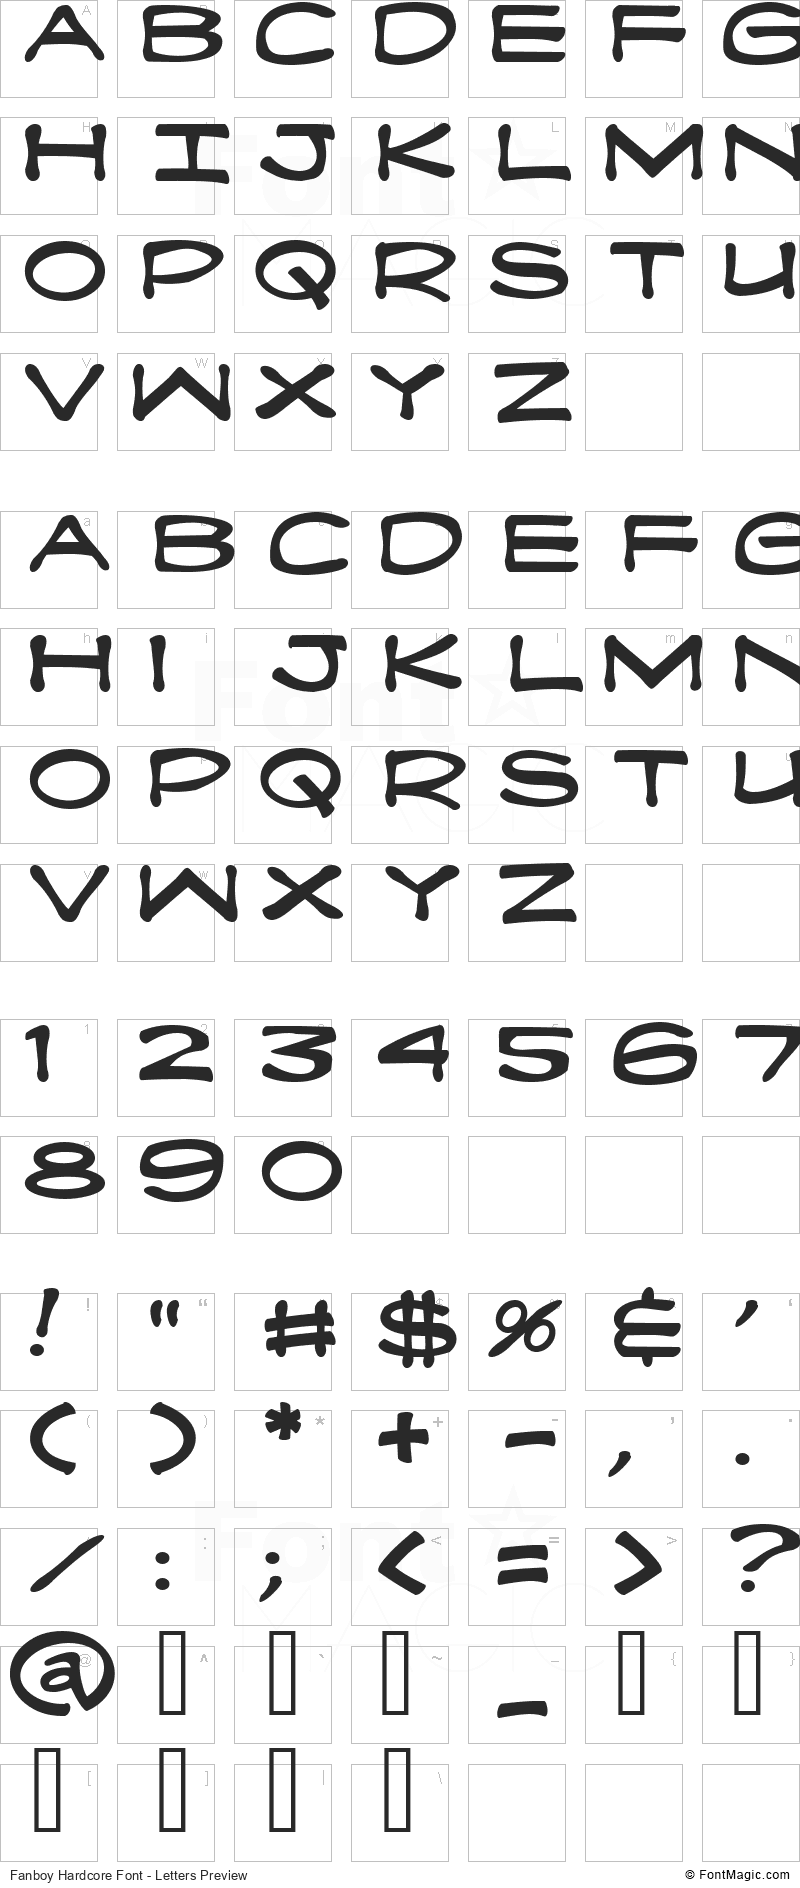 Fanboy Hardcore Font - All Latters Preview Chart